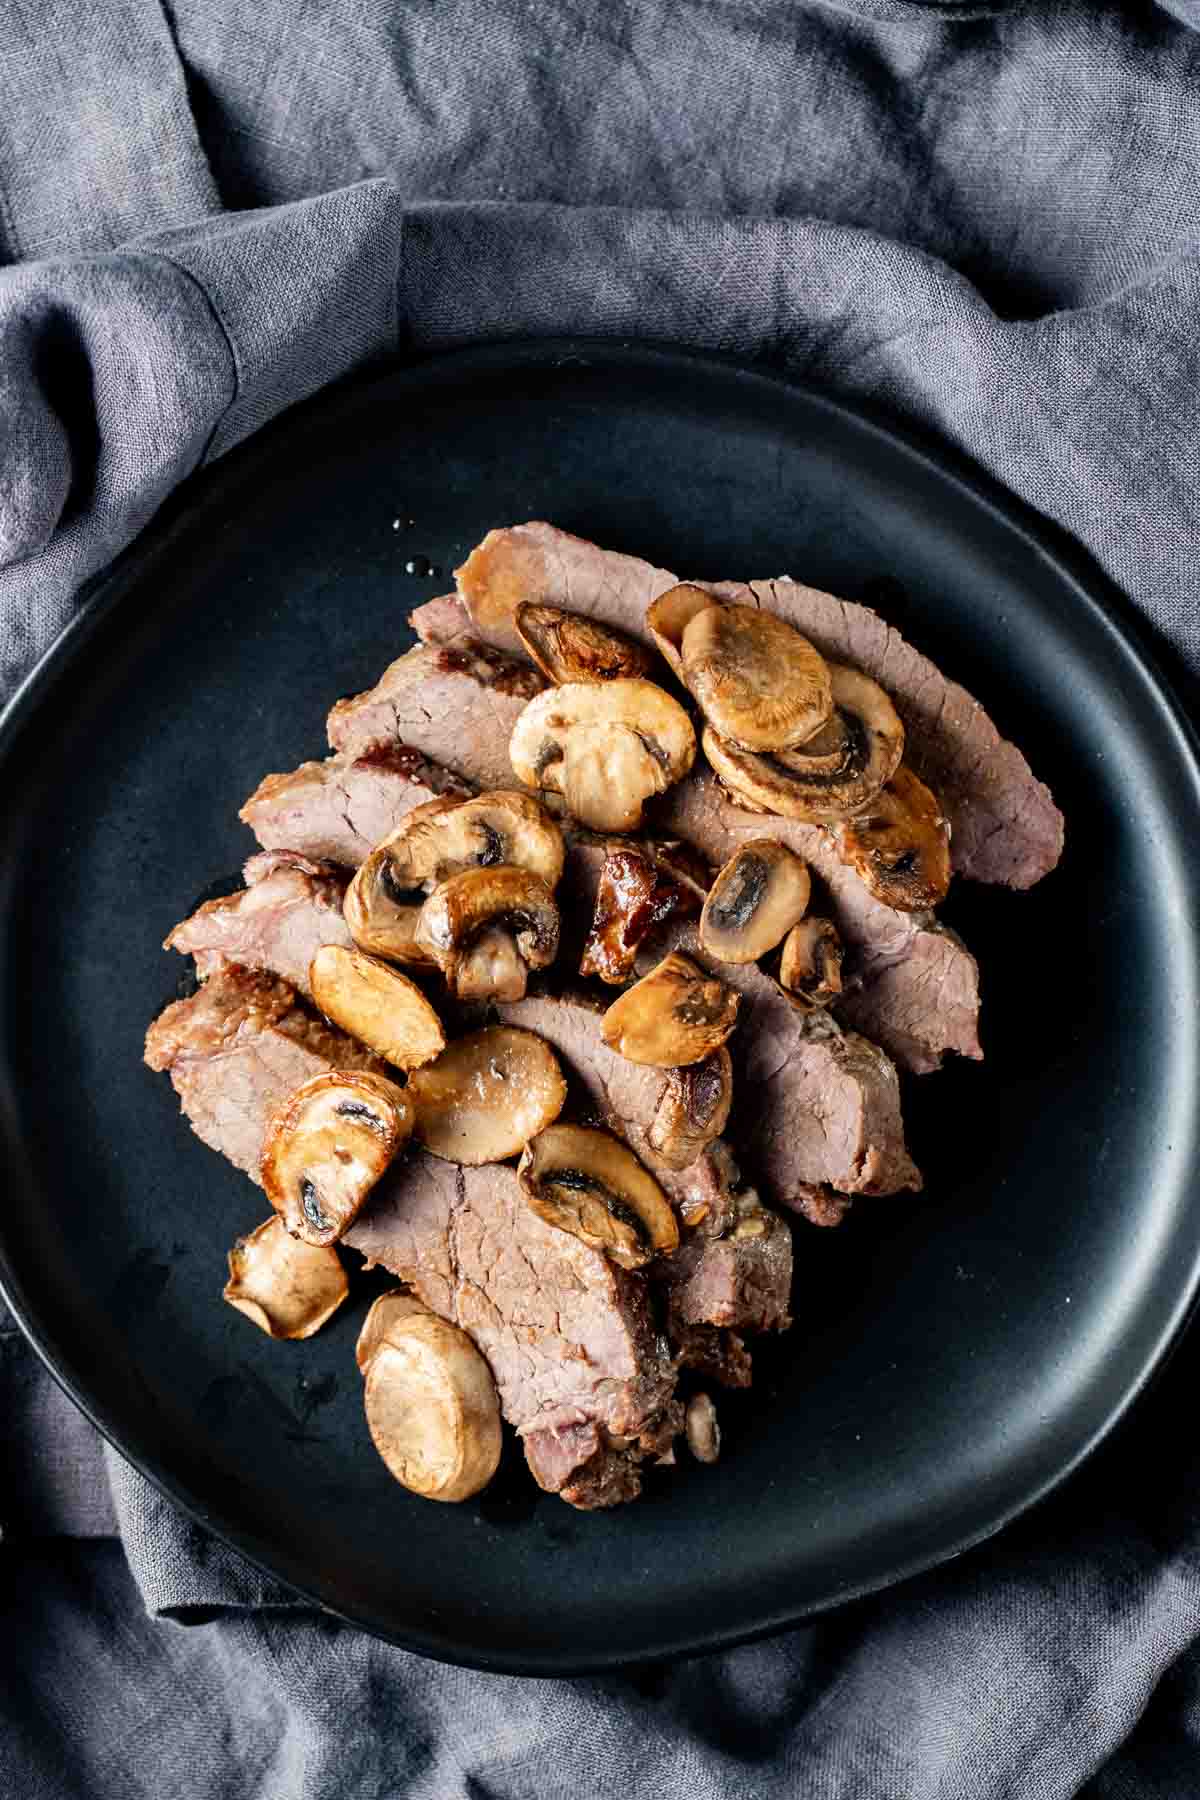 Overhead view of sliced London broil topped with mushrooms on a black plate.